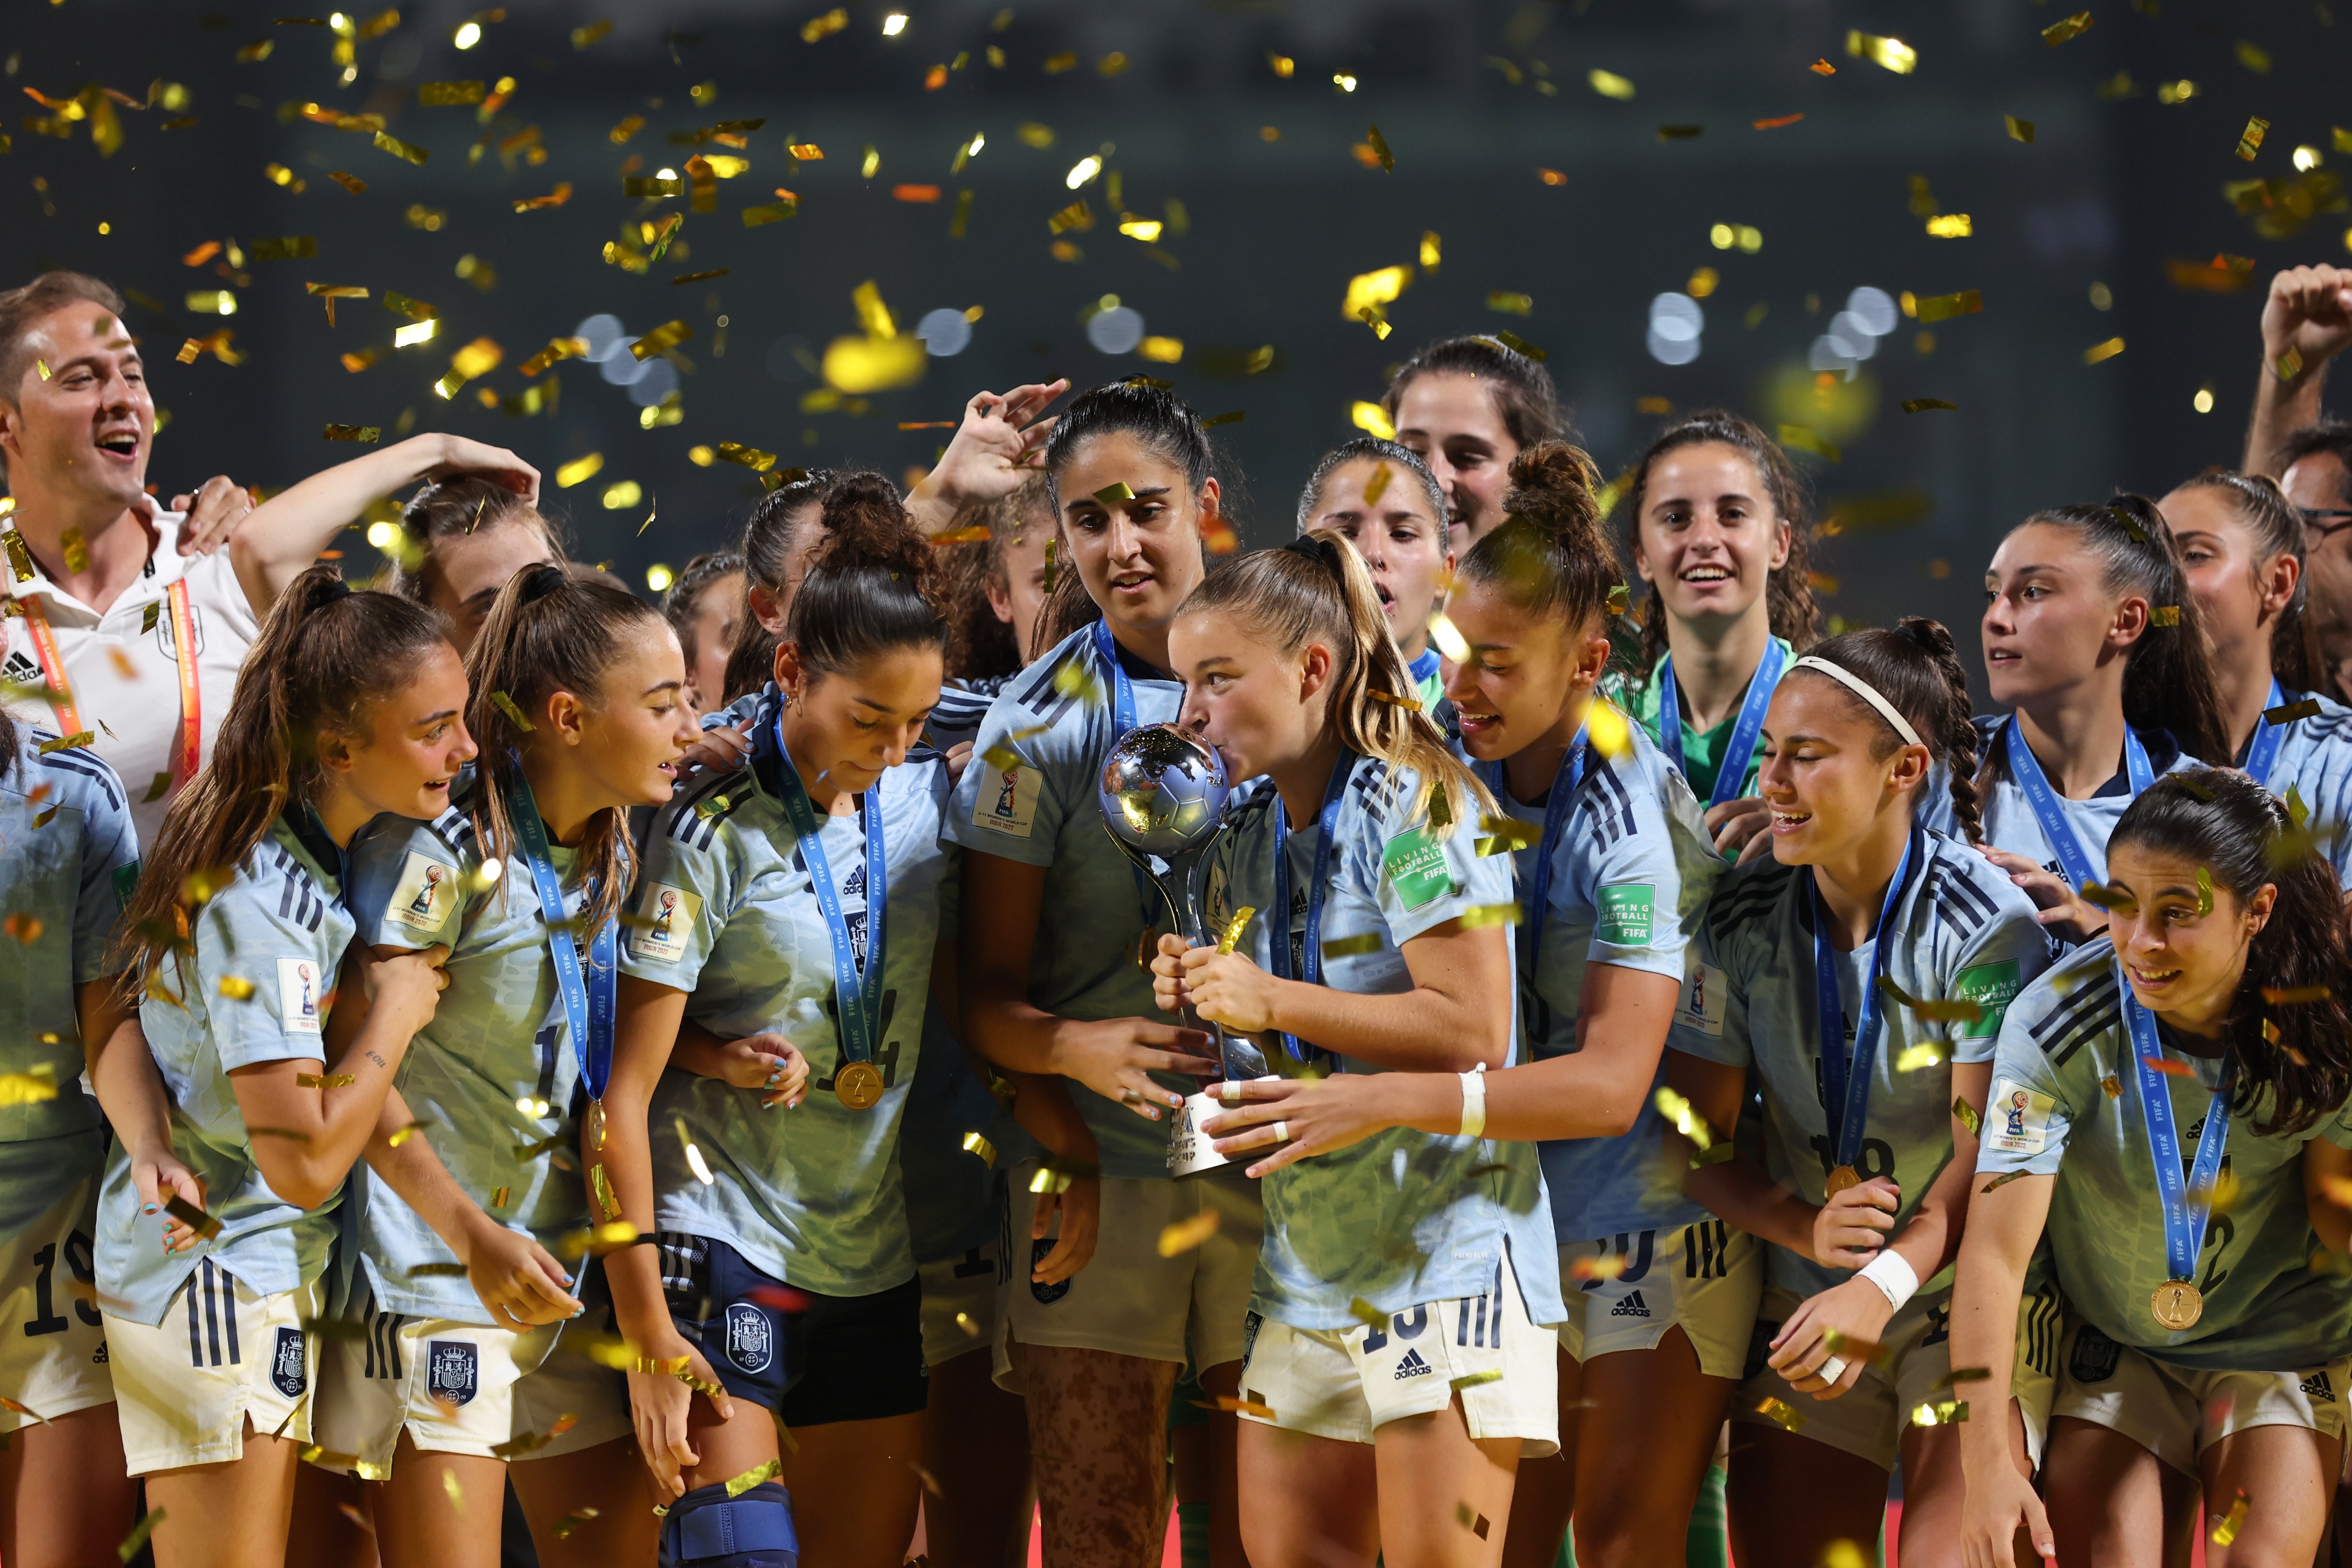 Spain vs Colombia Highlights: Own goal shatters Colombia's DREAMS, Spain U17 World Cup Champions after winning late in Mumbai, Watch FIFA U17 WC FINAL Highlights